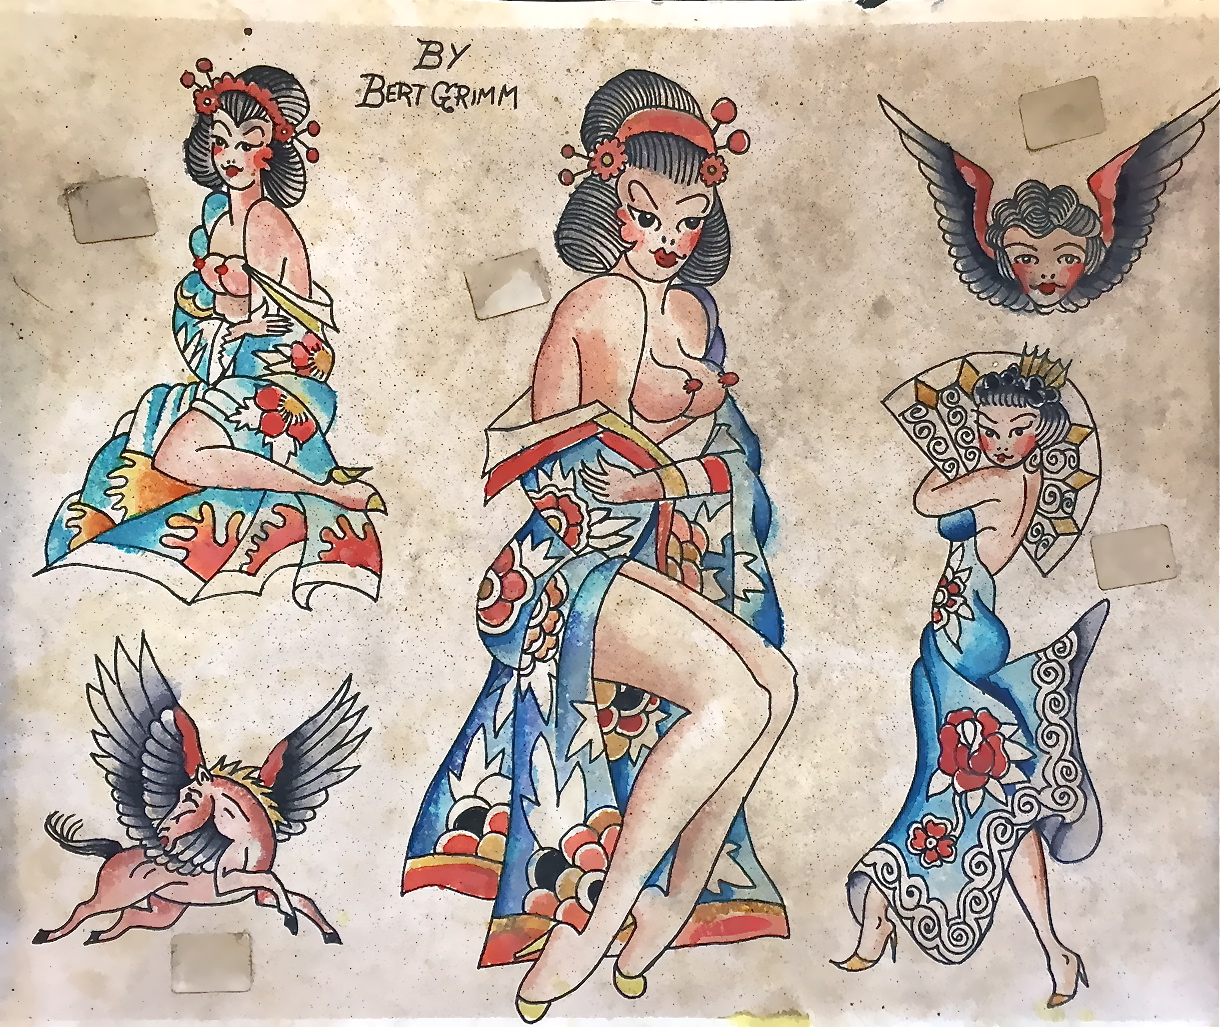  Pre WWII Japanese Geisha Girls.  Mr. Grimm had a huge influence on Sailor Jerry. 